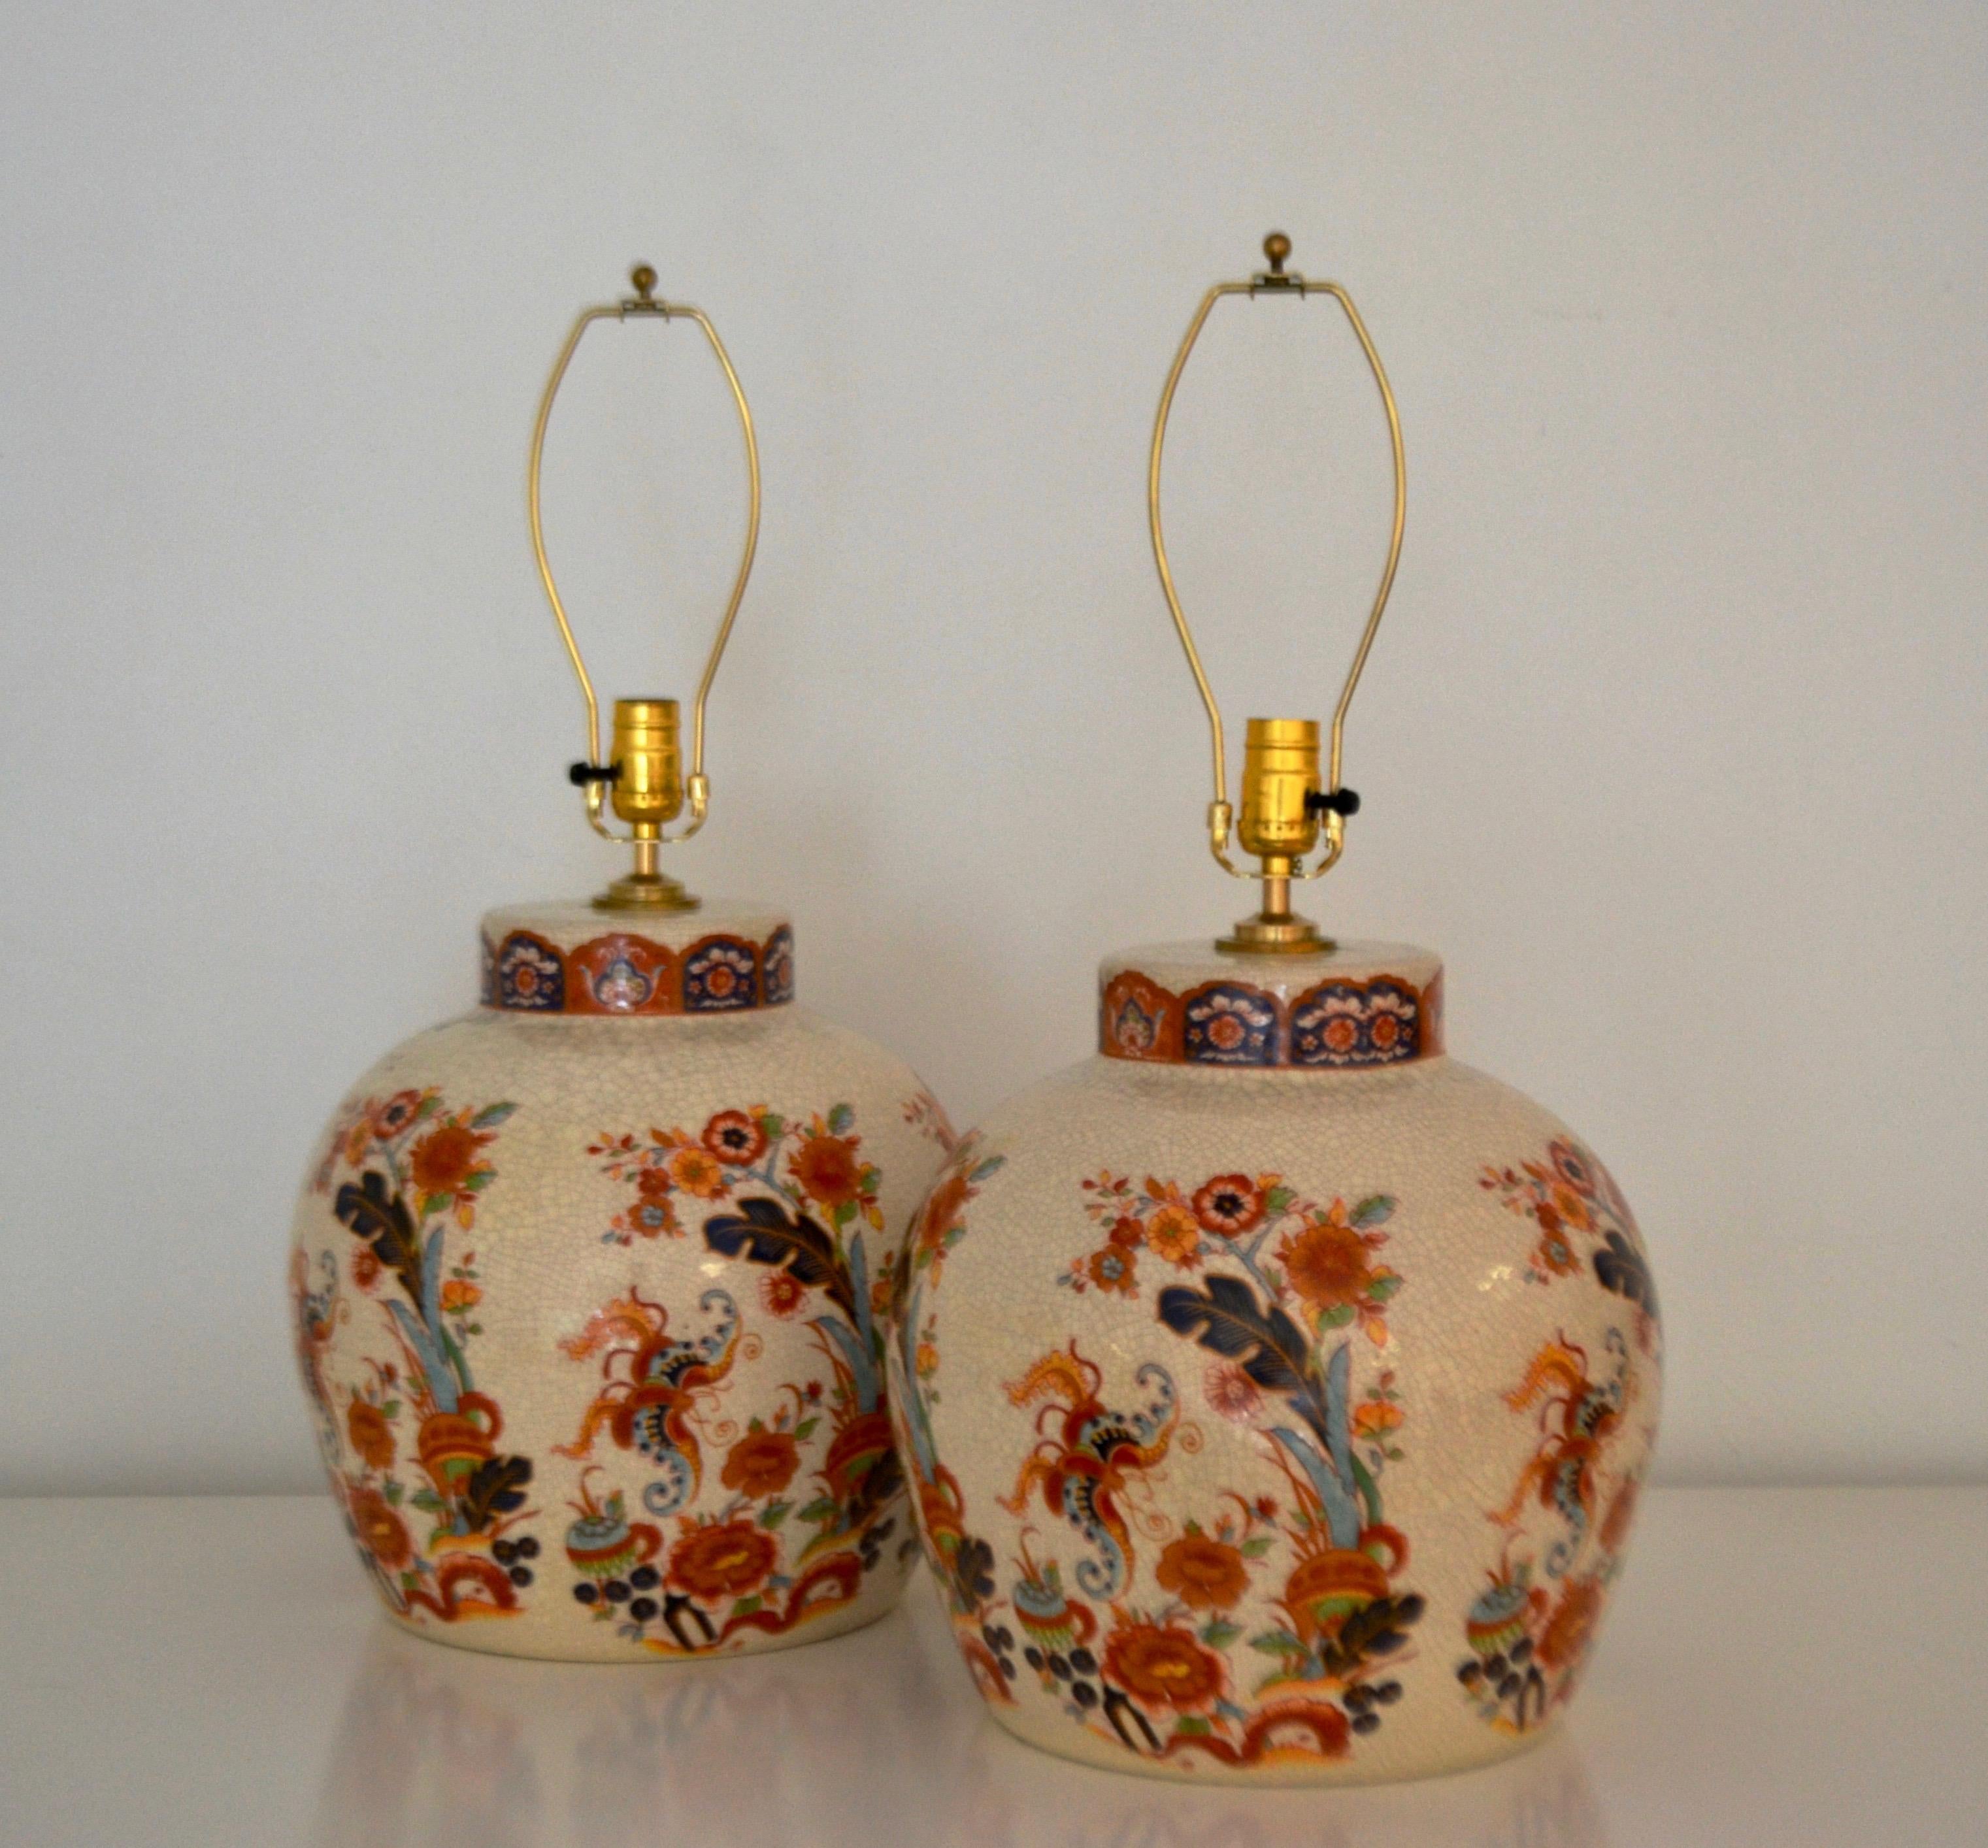 American Pair of Ceramic Crackle Glazed Jar Form Table Lamps For Sale